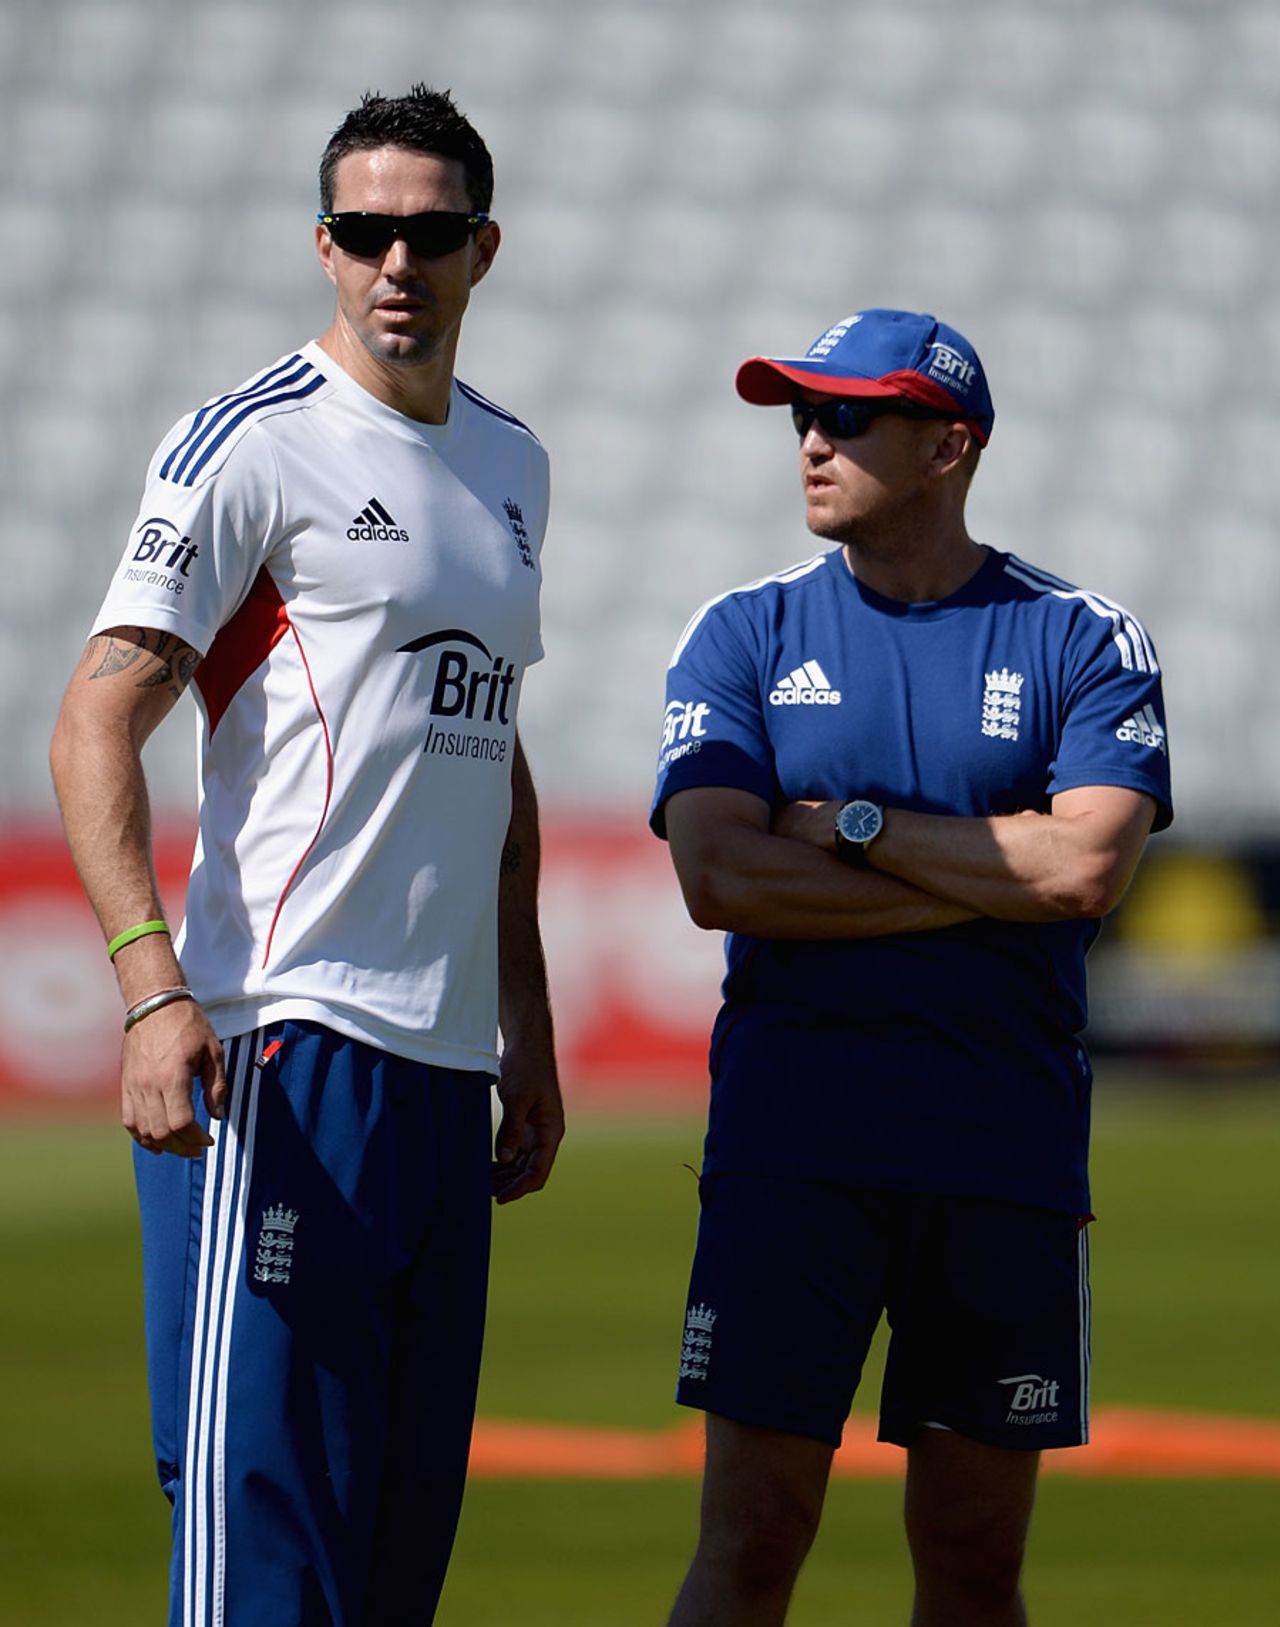 Andy Flower chats with Kevin Pietersen, Trent Bridge, July 9, 2013